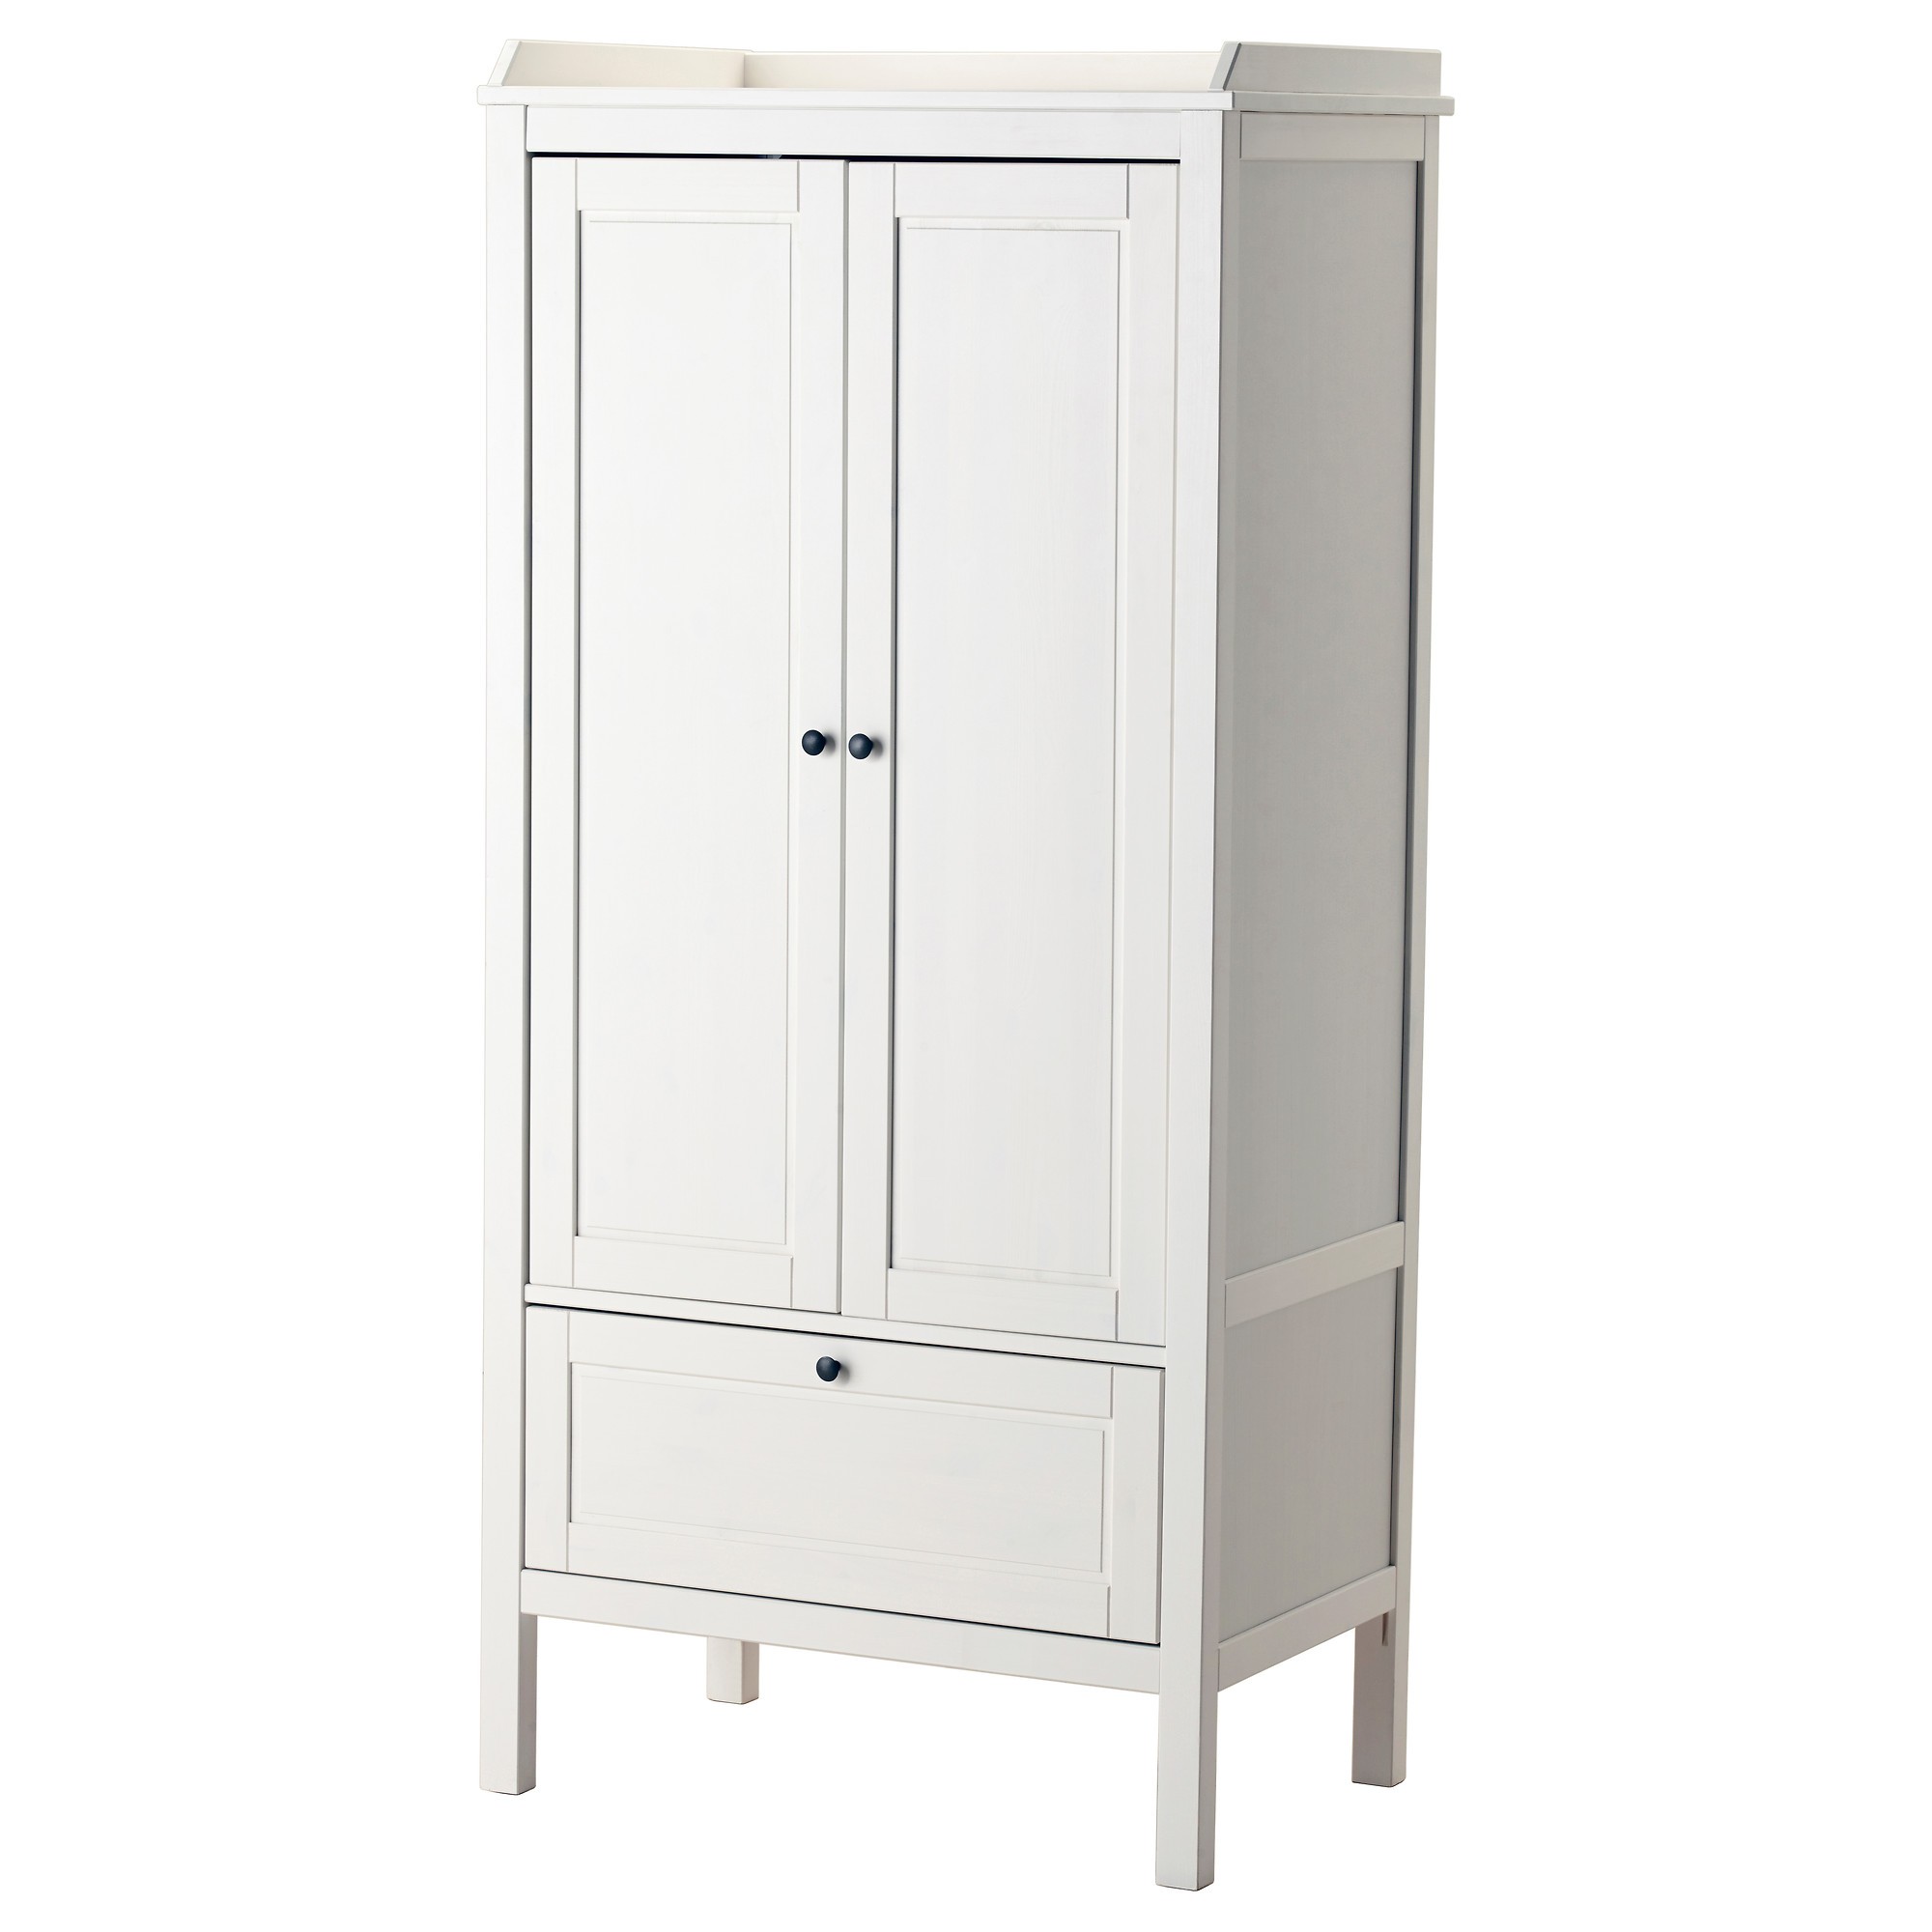 Furniture. white wooden Wardrobe with doors and single drawer also four  legs. Contemporary Idea